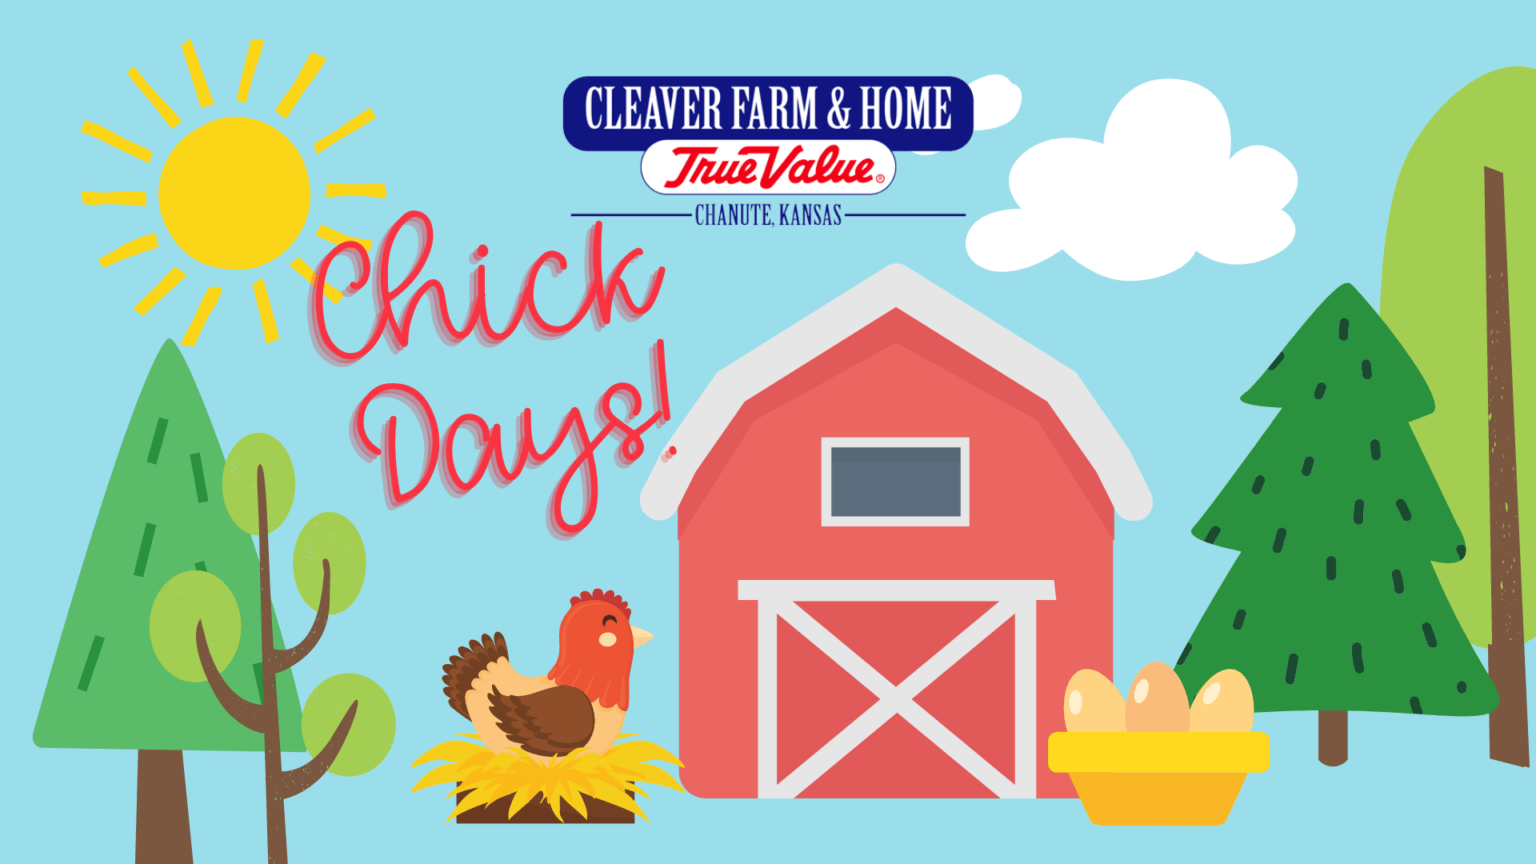 Chick Days Annual Event! Cleaver Farm and Home